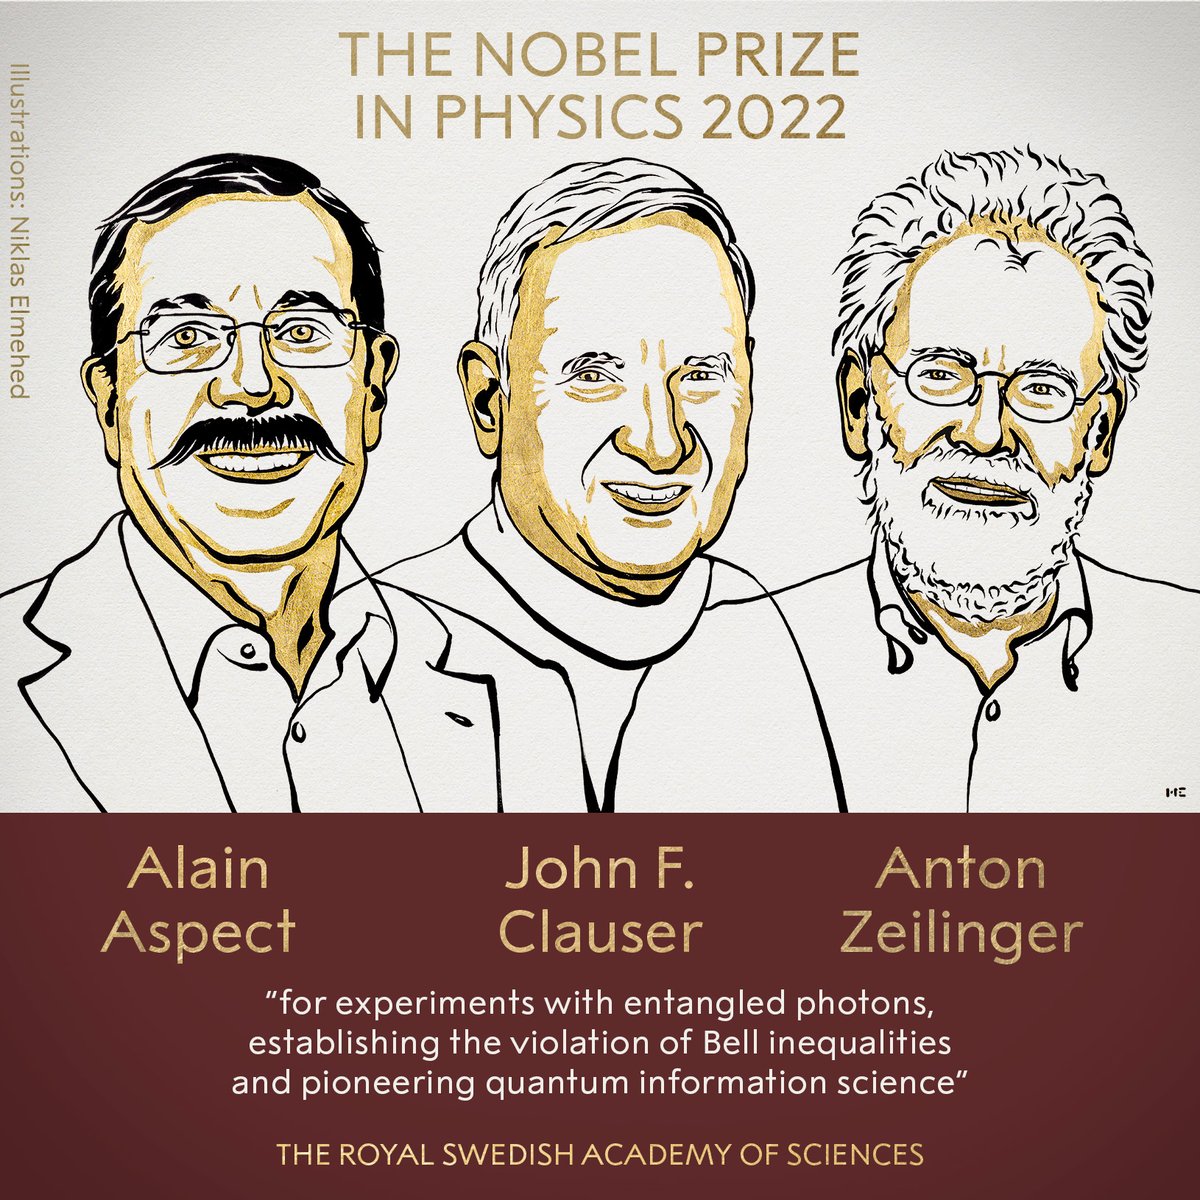 BREAKING NEWS: The Royal Swedish Academy of Sciences has decided to award the 2022 #NobelPrize in Physics to Alain Aspect, John F. Clauser and Anton Zeilinger.